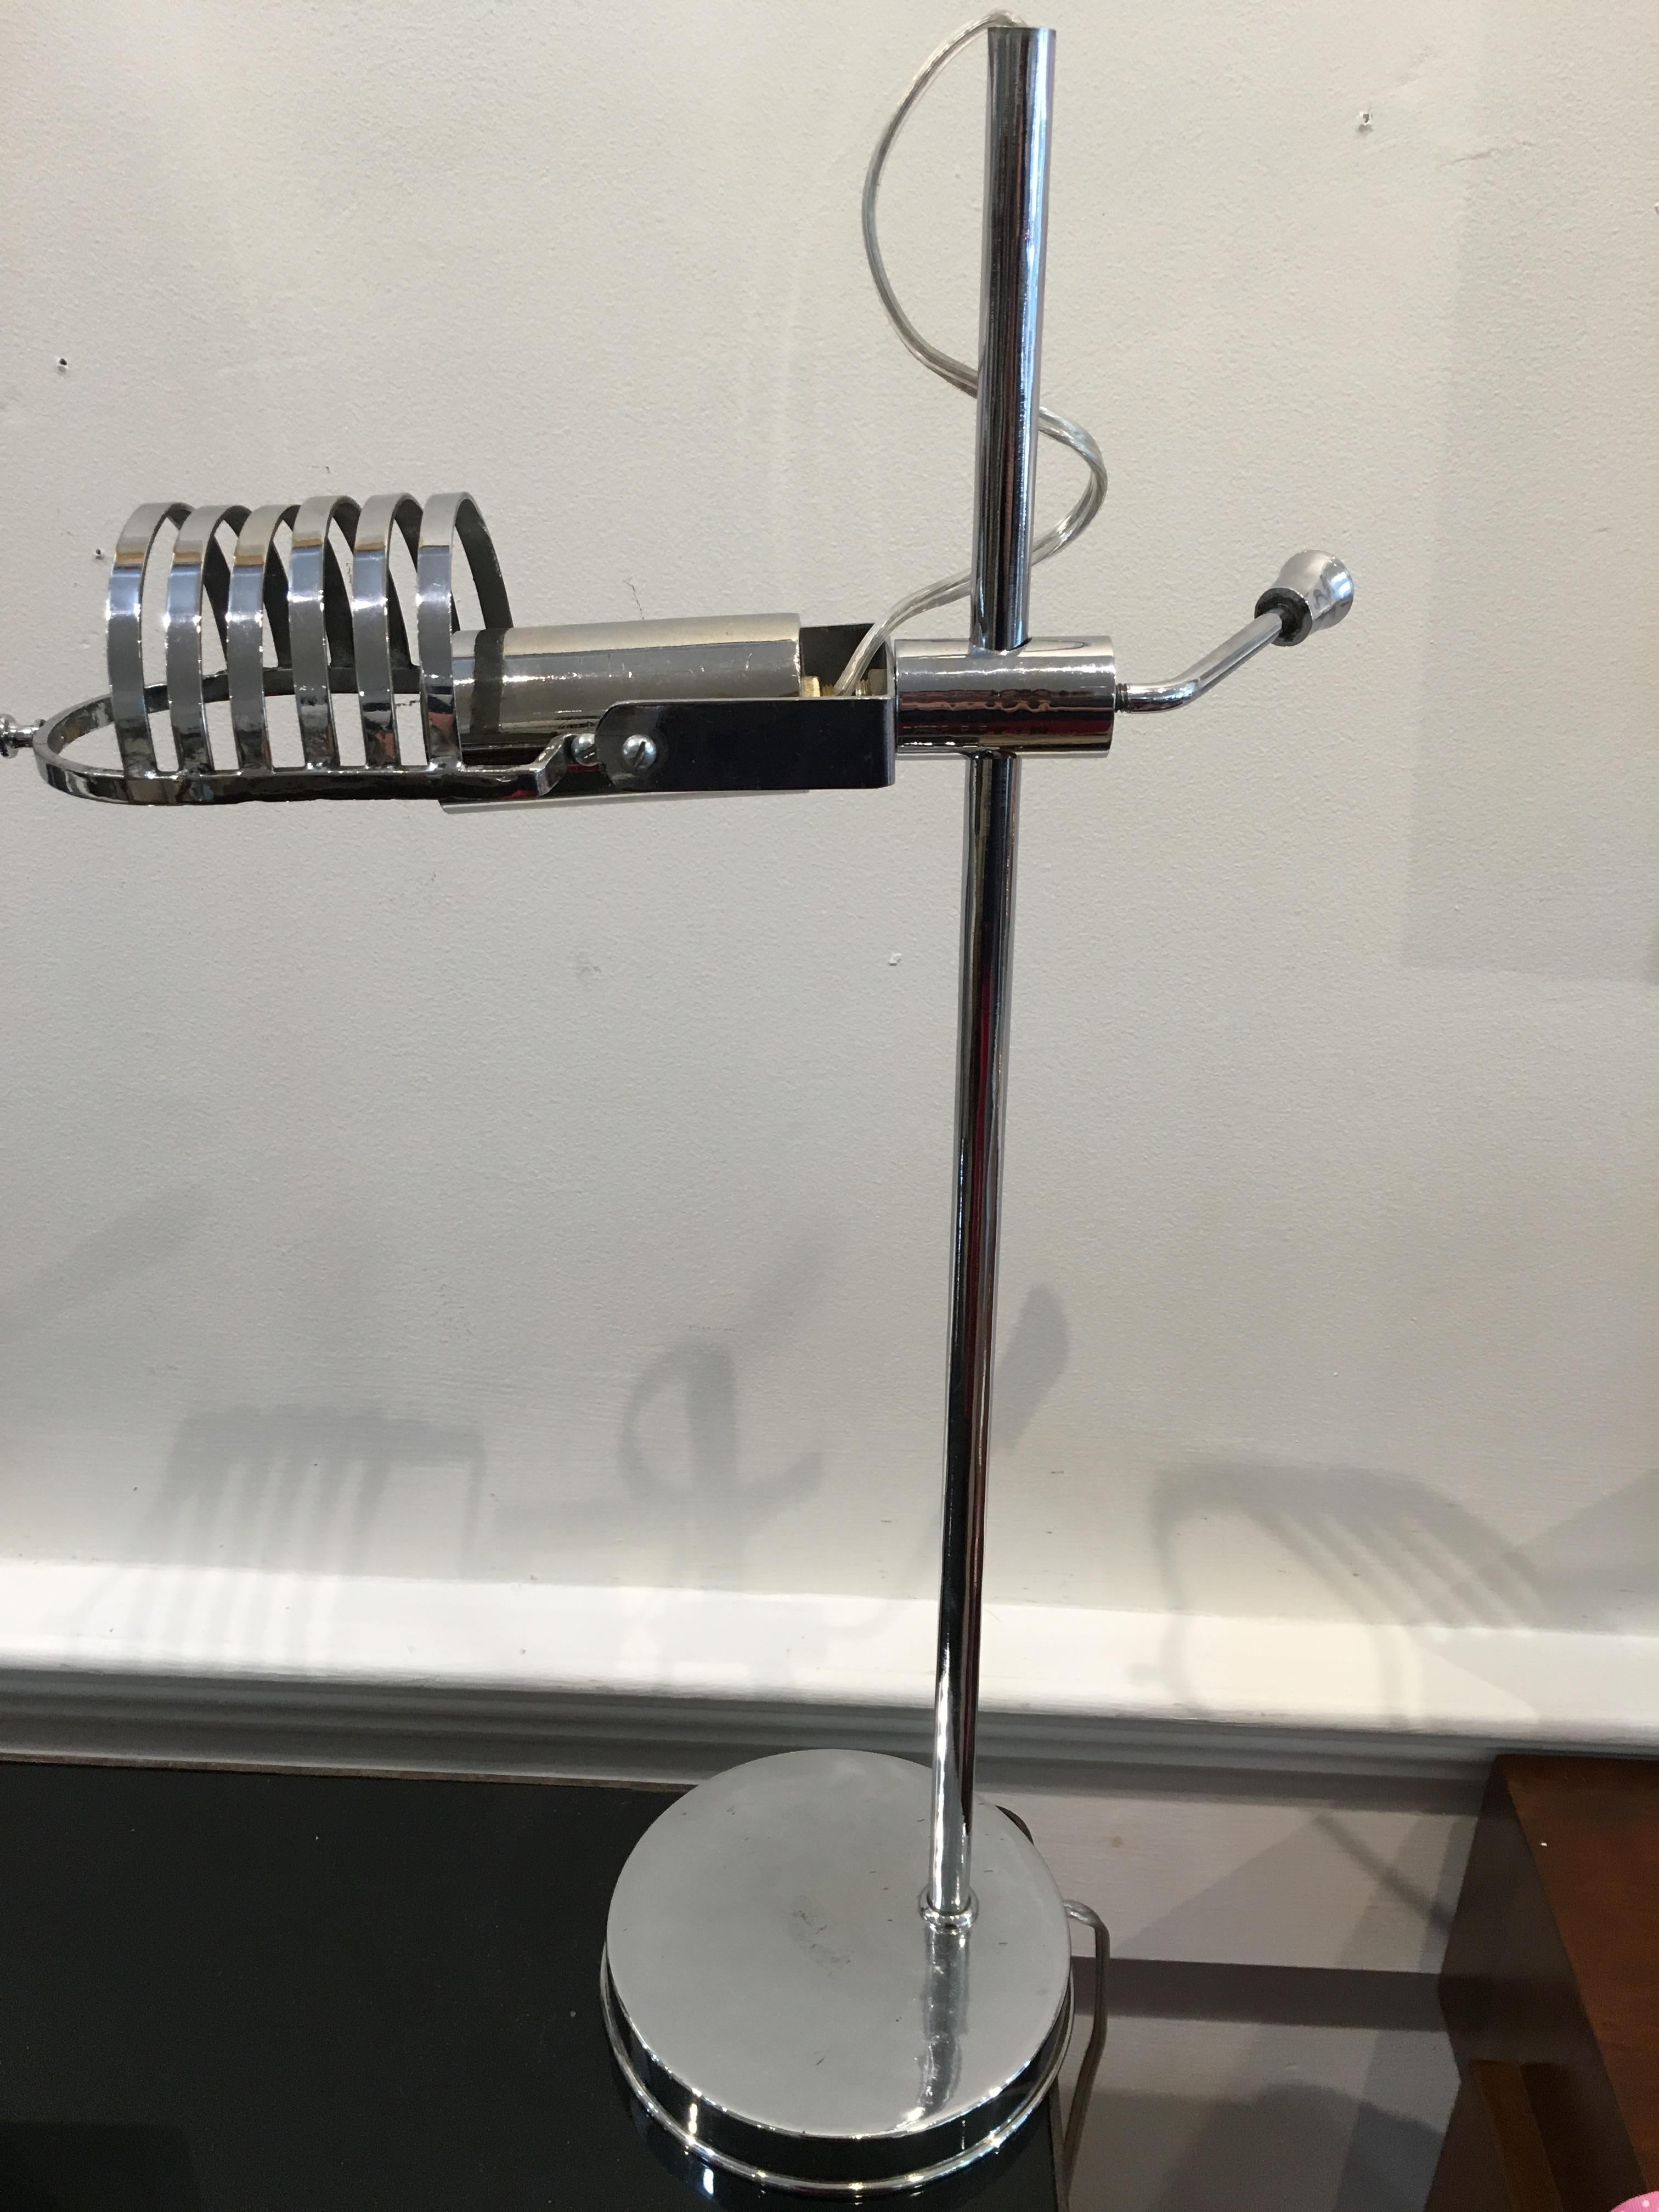 Mid-Century Modern chrome desk light. It adjusts up and down using the lever and the open work shade portion tilts up and down. It takes a European base bulb, which are easy to find. Rewired for American use. Very sculptural yet practical. Base